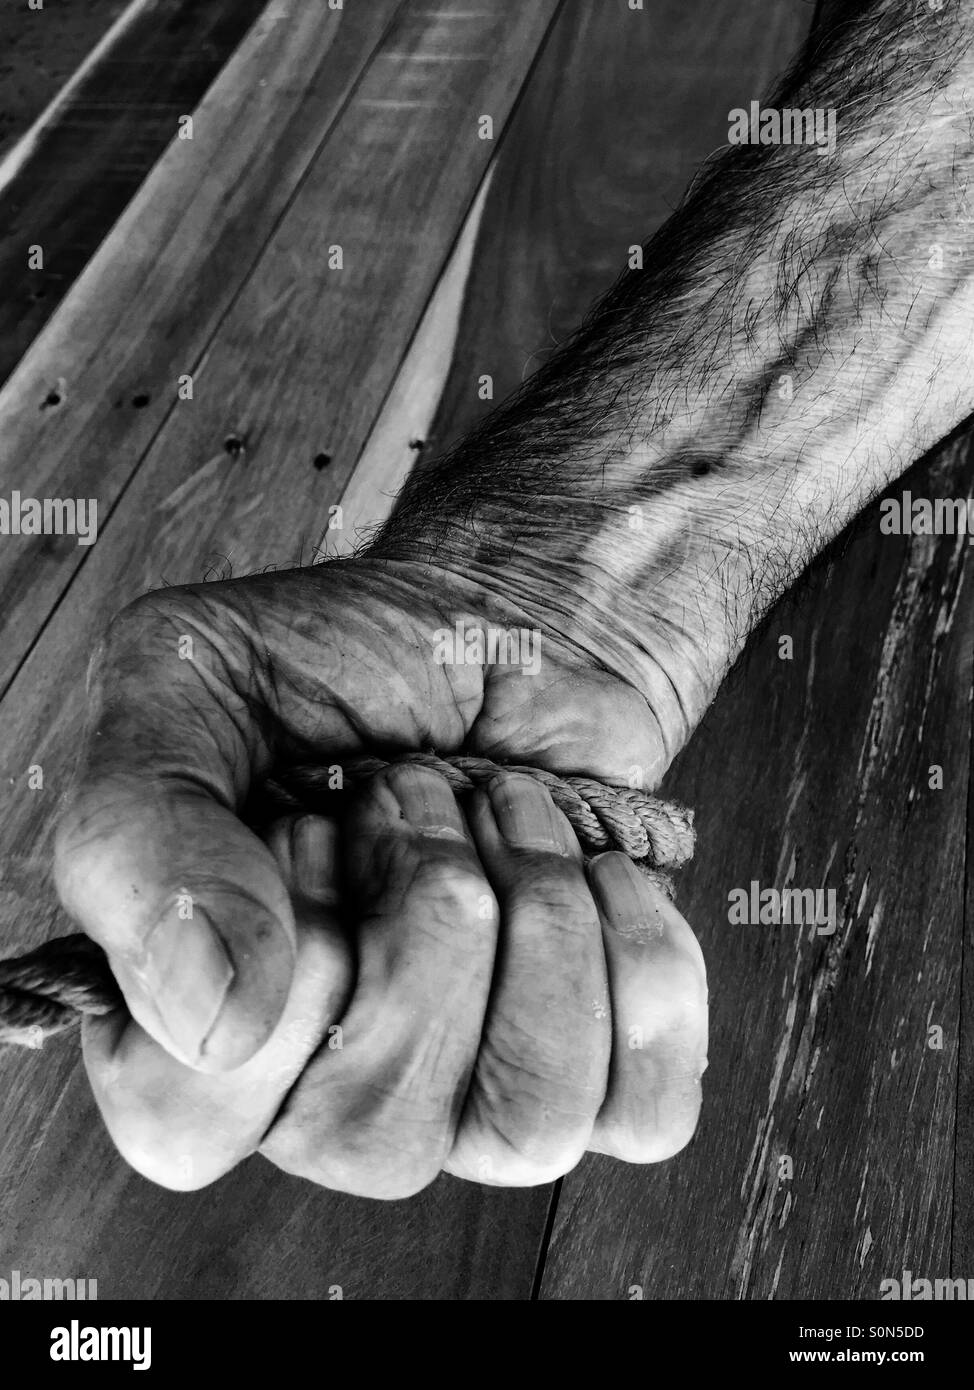 Old man pulling rope Stock Photo